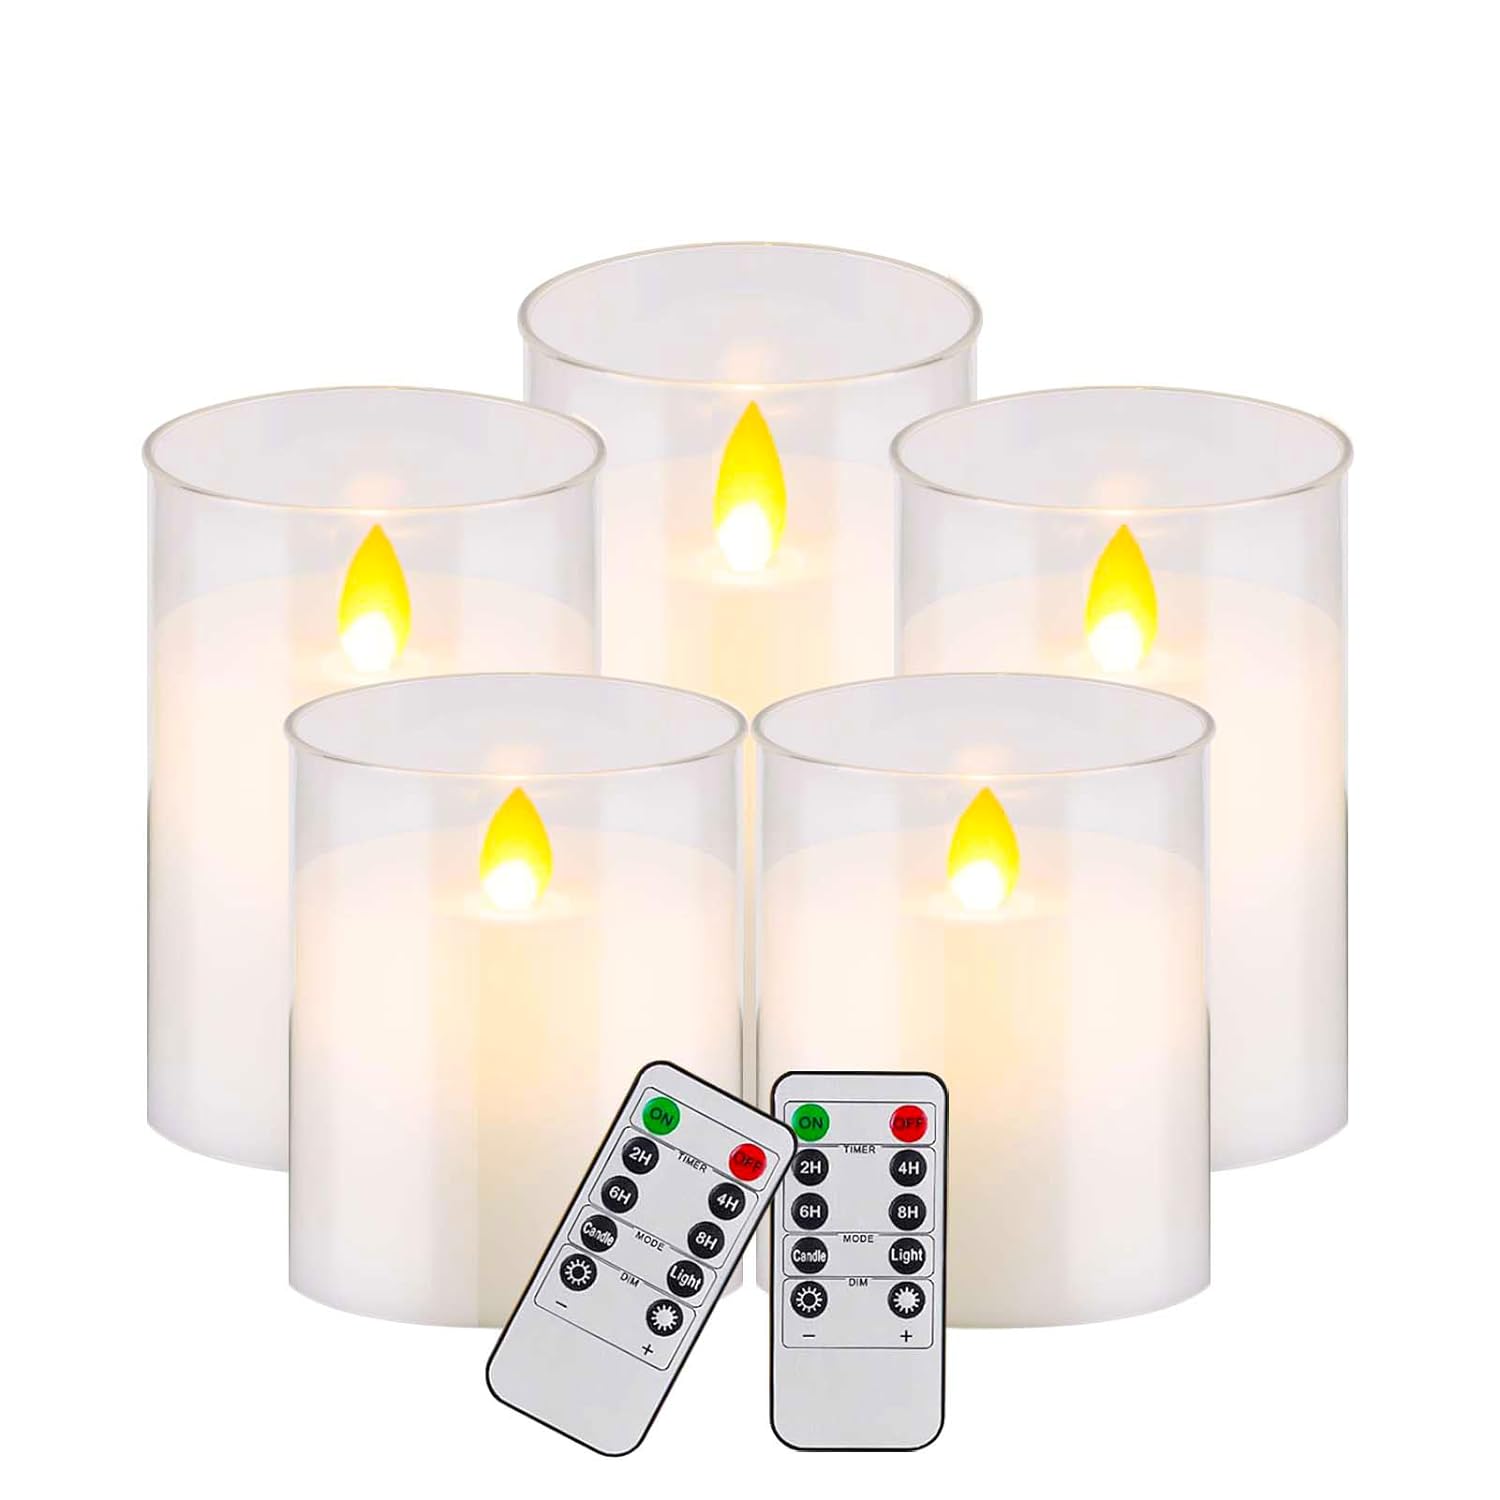 Sudifor Pure White Candle Lights, Plexiglass Flickering Flameless Candles with 2 Remote and Timer, 5 (D 3"×H 4" 4" 5" 5" 6") Pack Large Pillar Candles Battery Operated for Home and Holiday Decoration